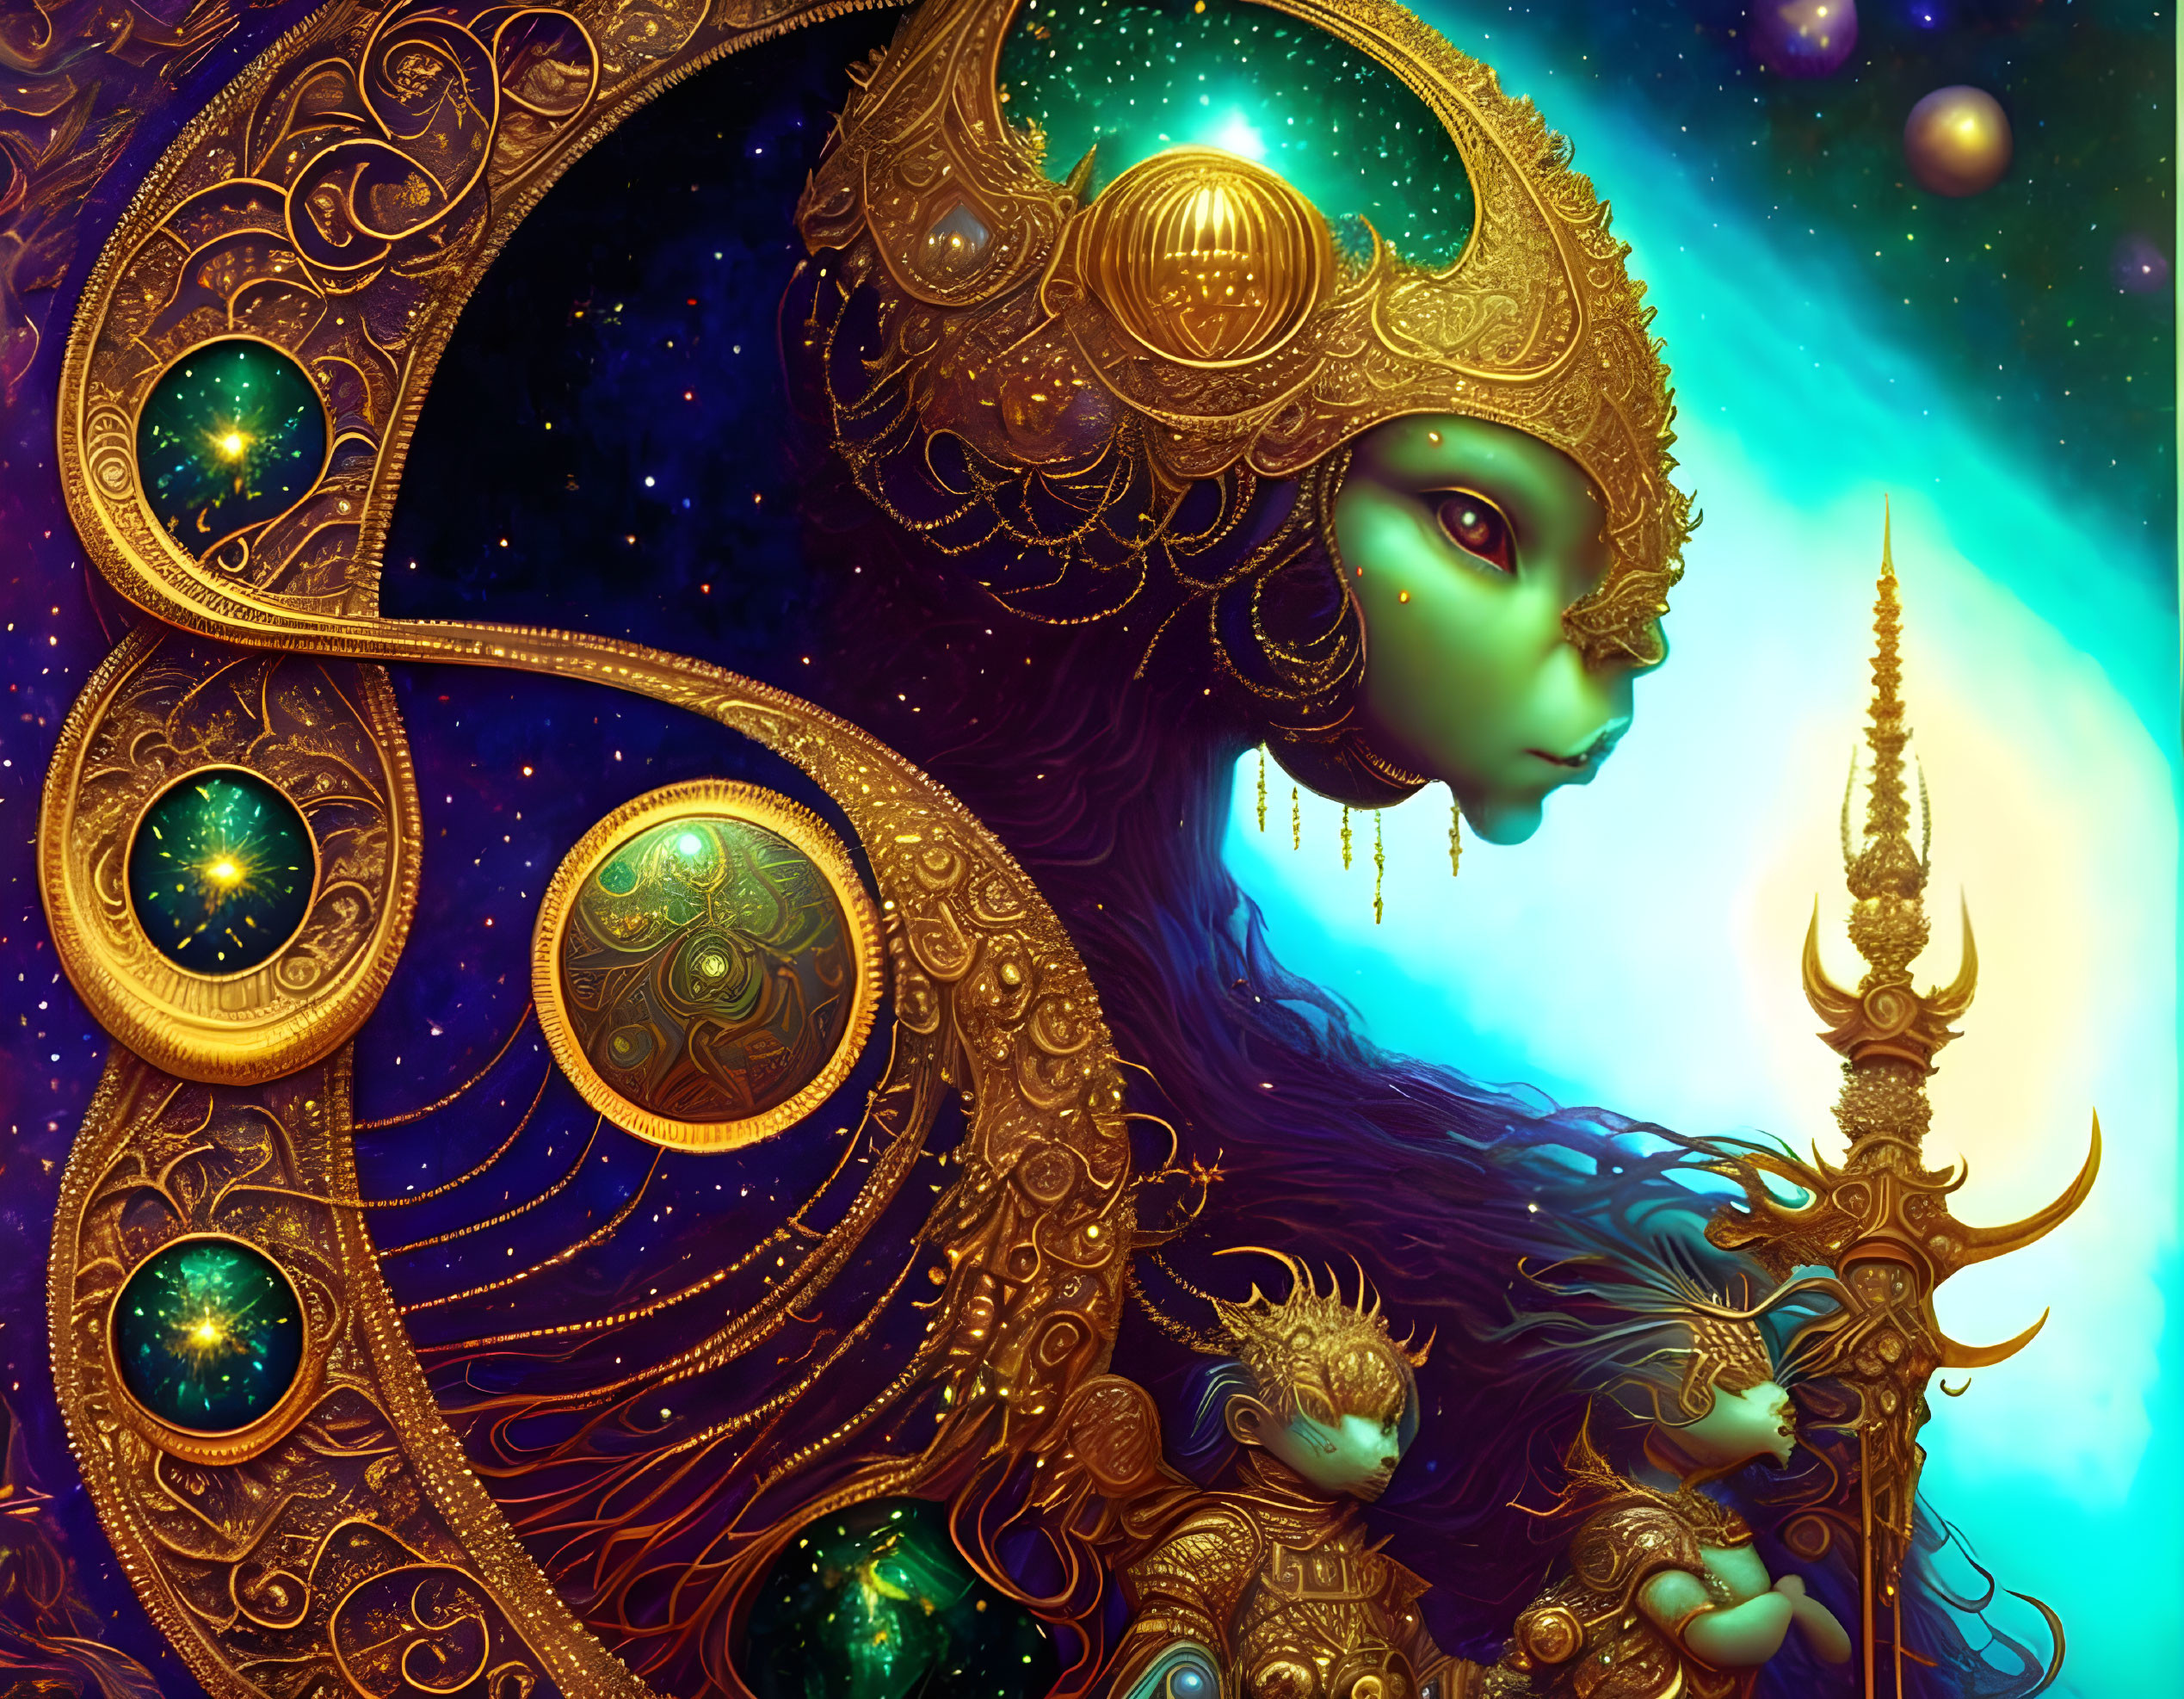 Colorful illustration of mystical female figure with green skin and golden headdress in cosmic setting